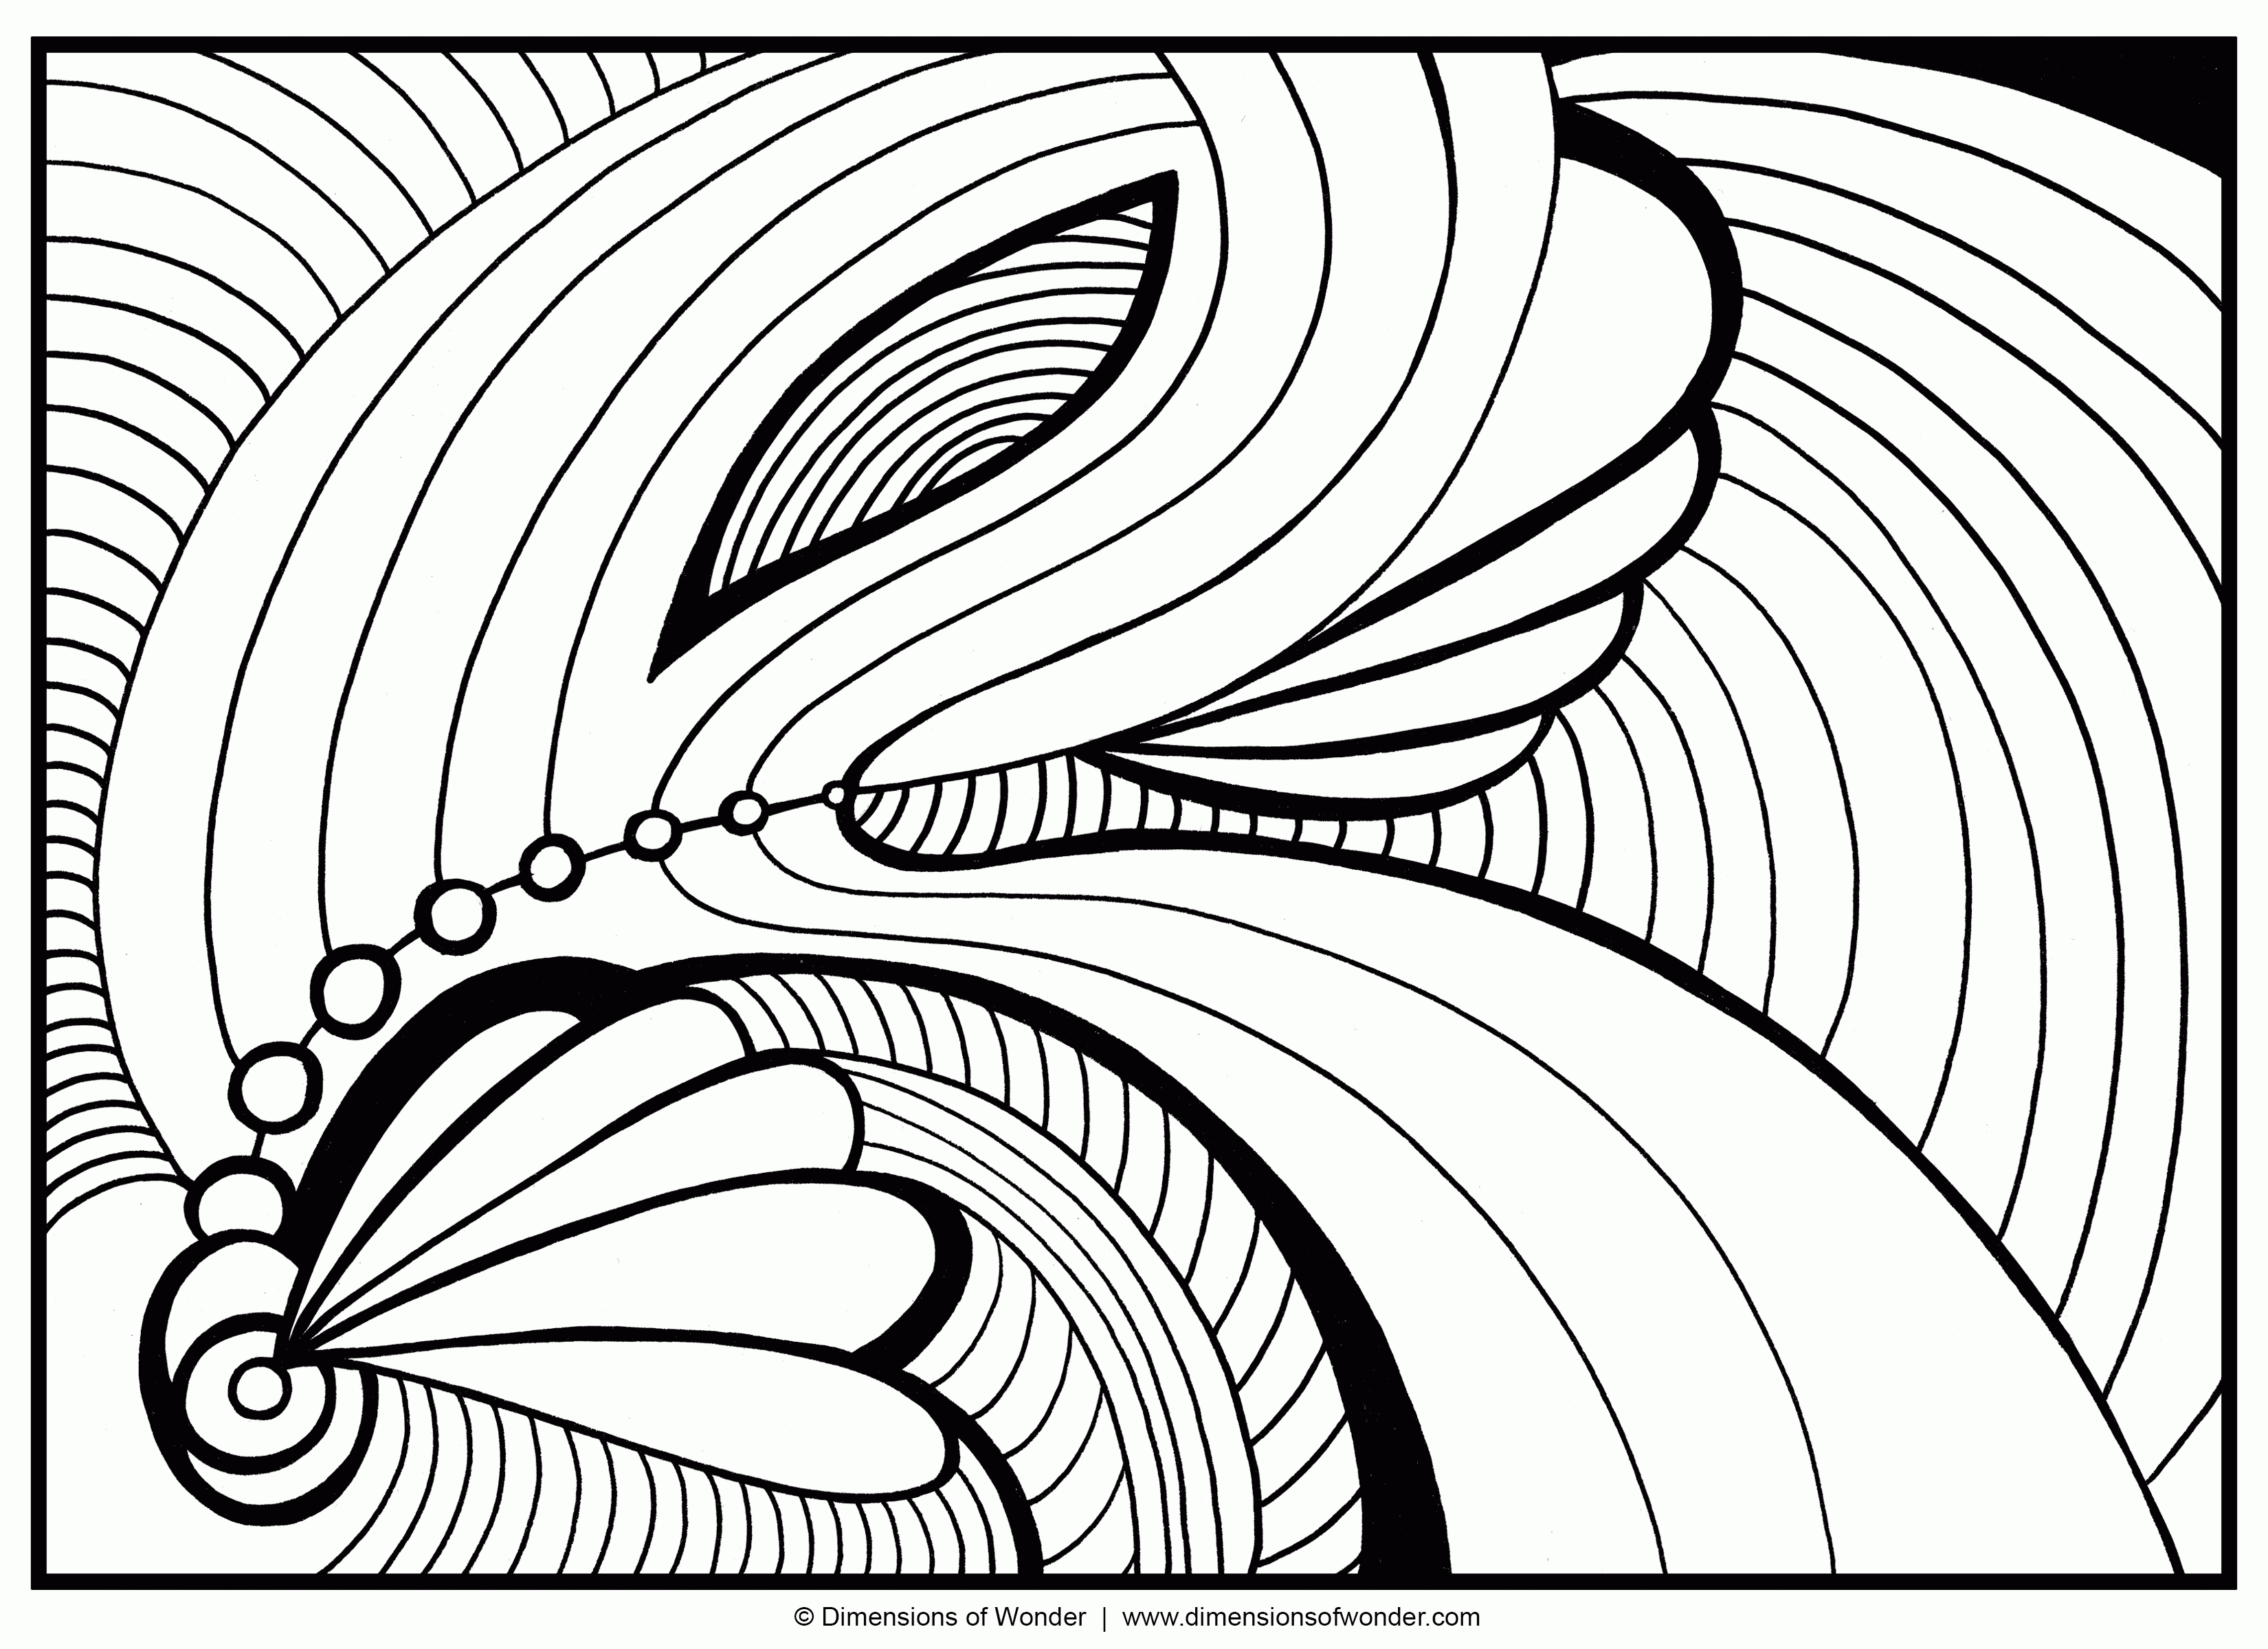 Coloring Pages Hard Designs - Coloring Home